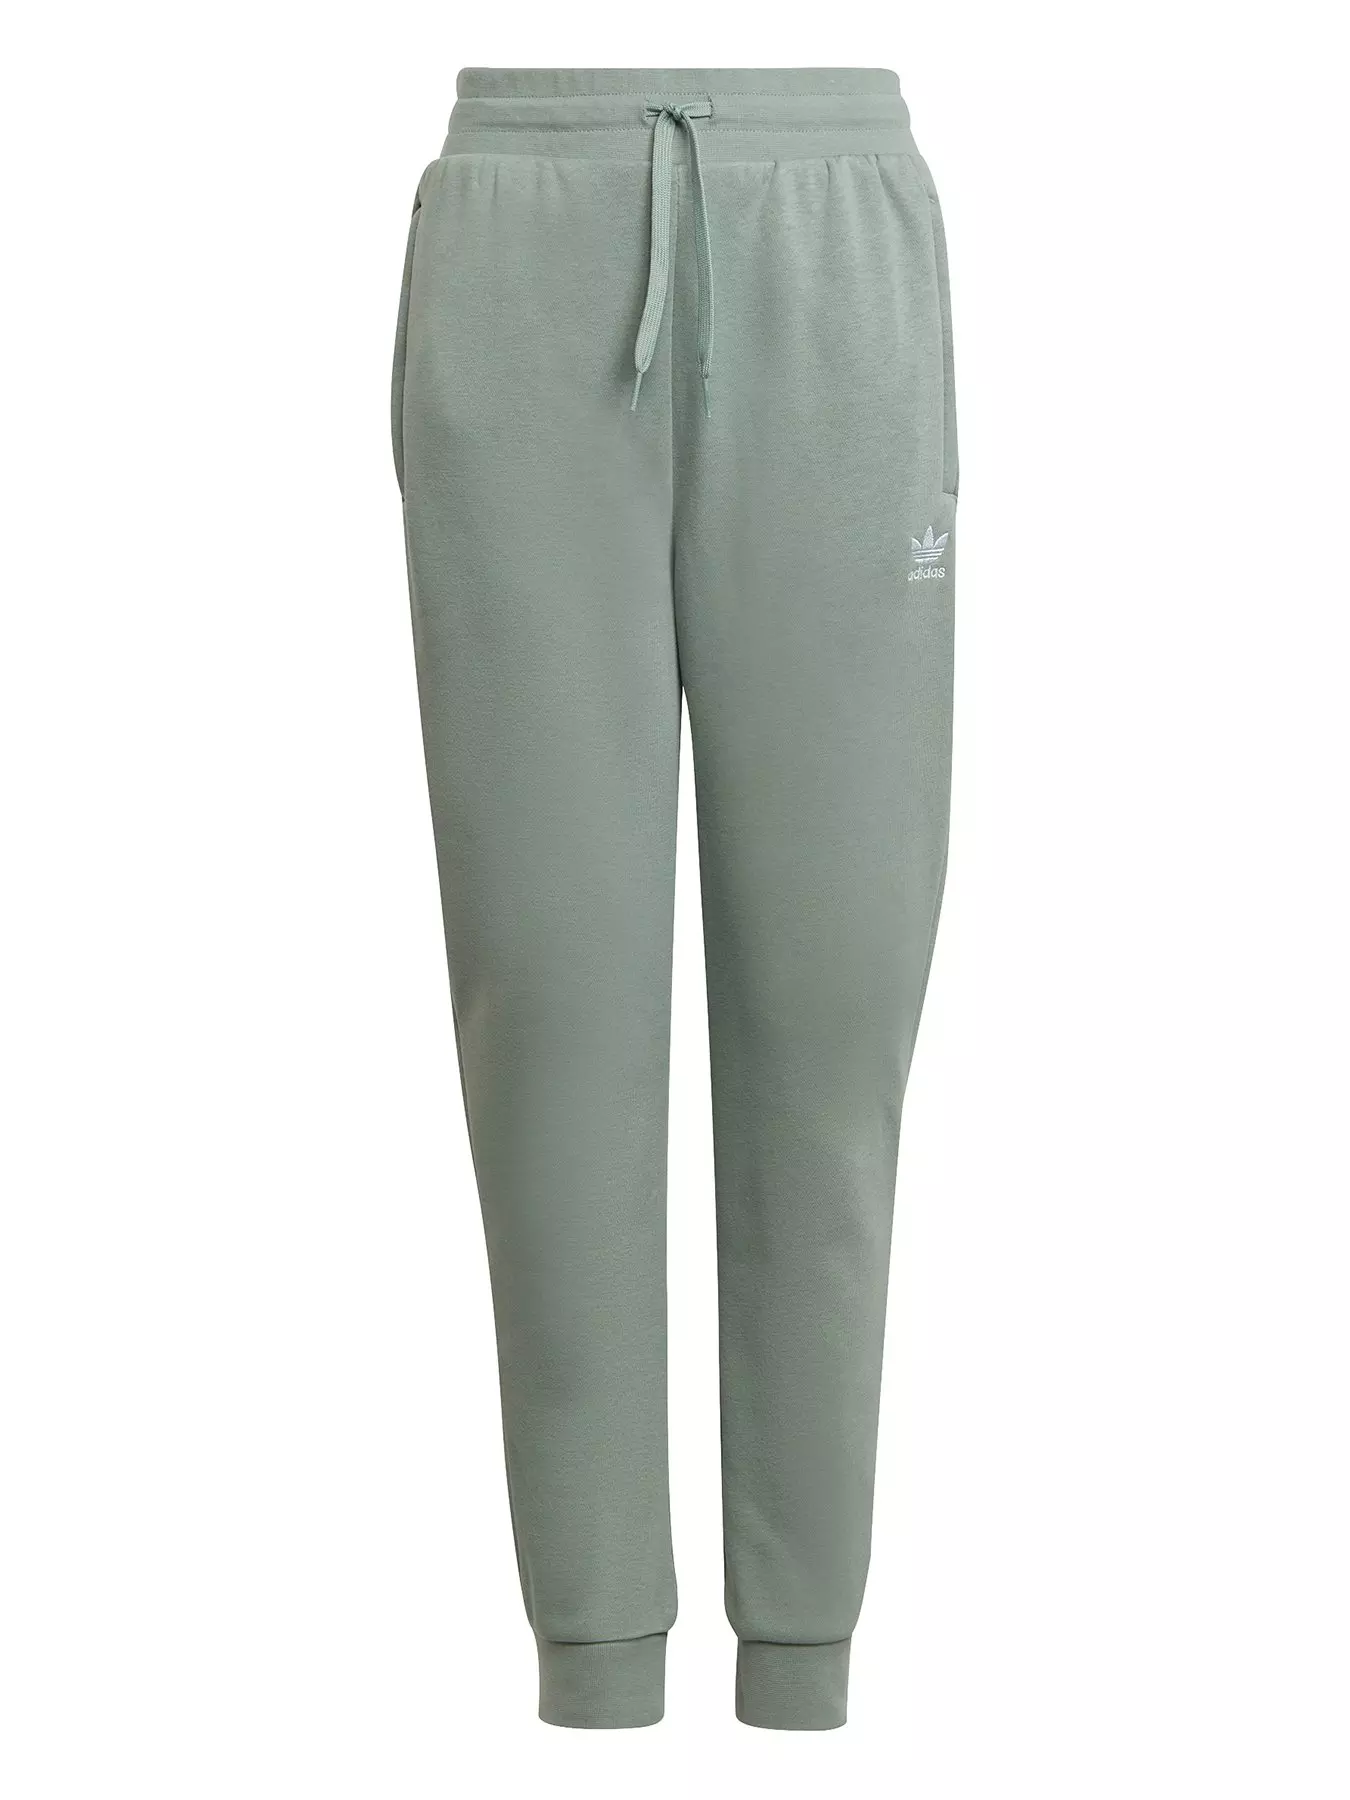 Wizard optioneel Levendig Adidas | Jogging bottoms | Kids & baby sports clothing | Sports & leisure |  www.very.co.uk